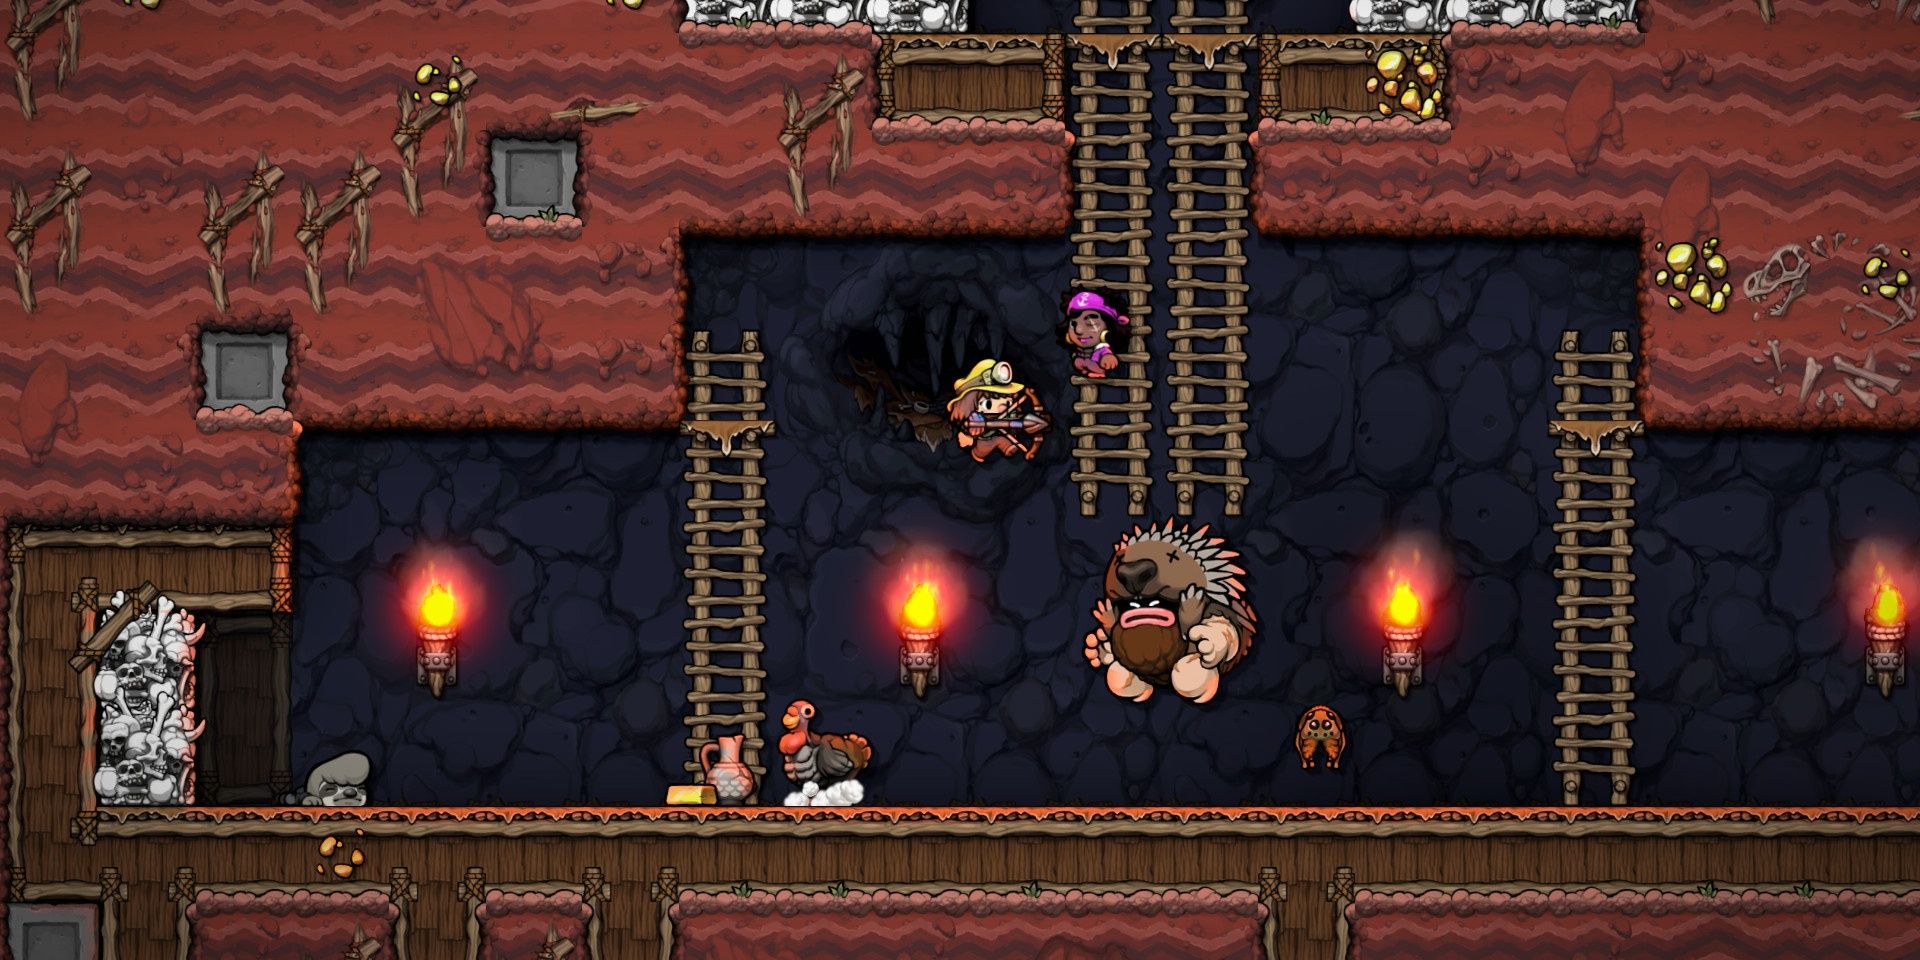 A screenshot showing gameplay in Spelunky 2